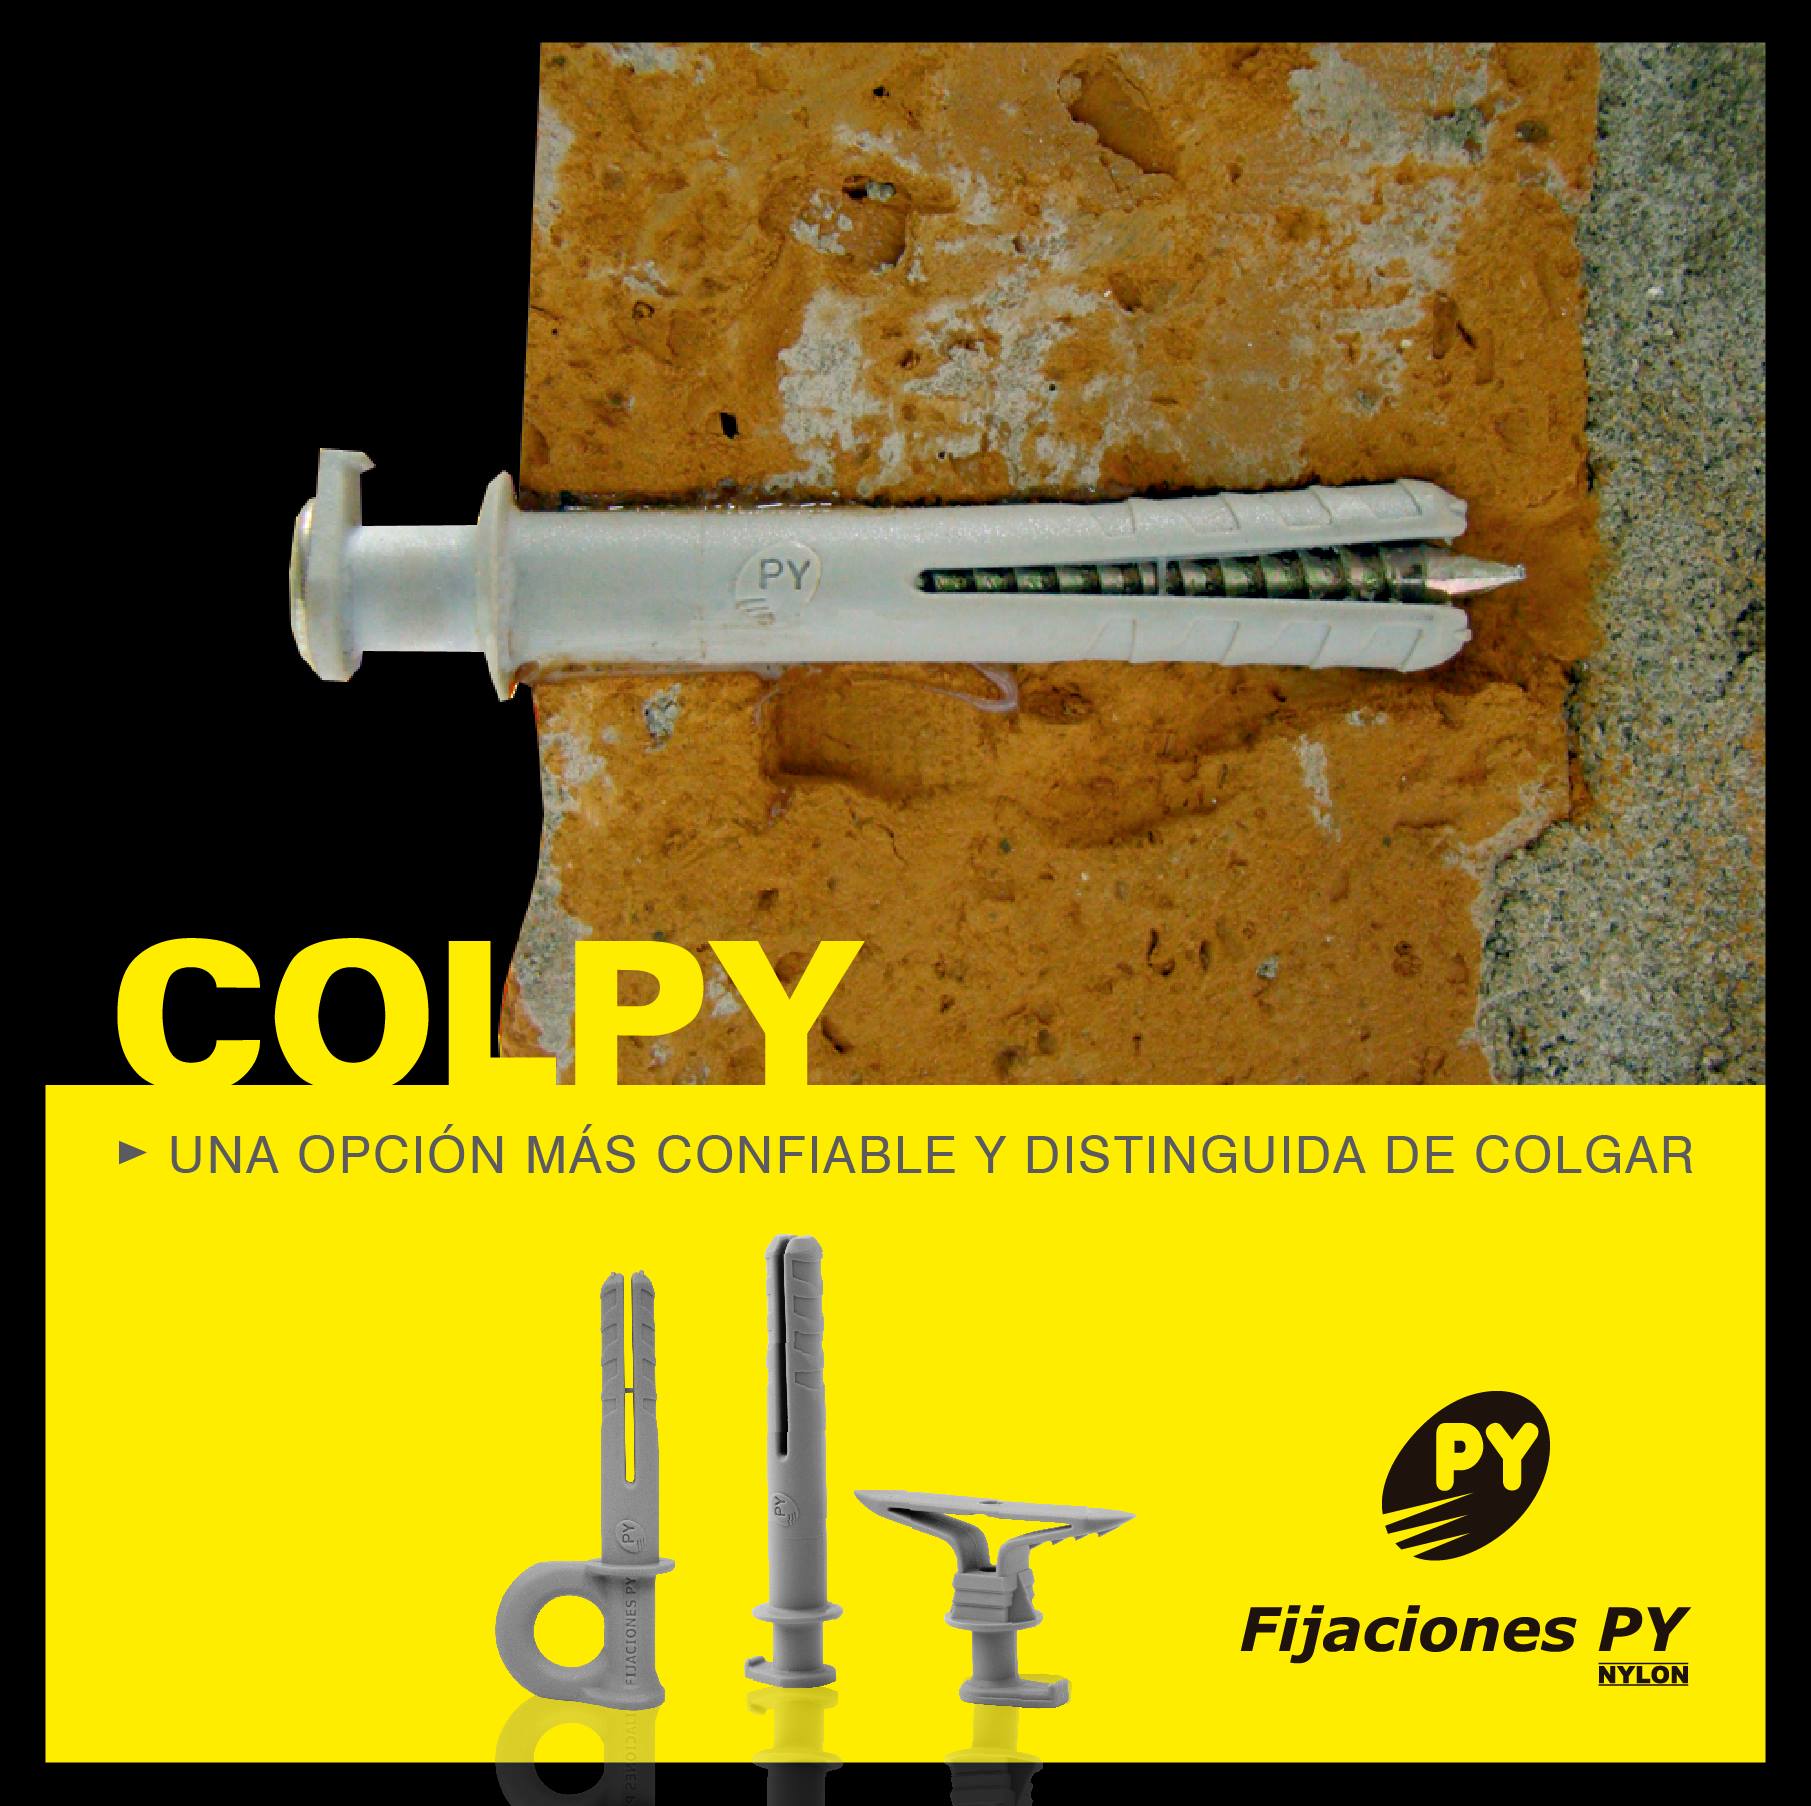 colpy